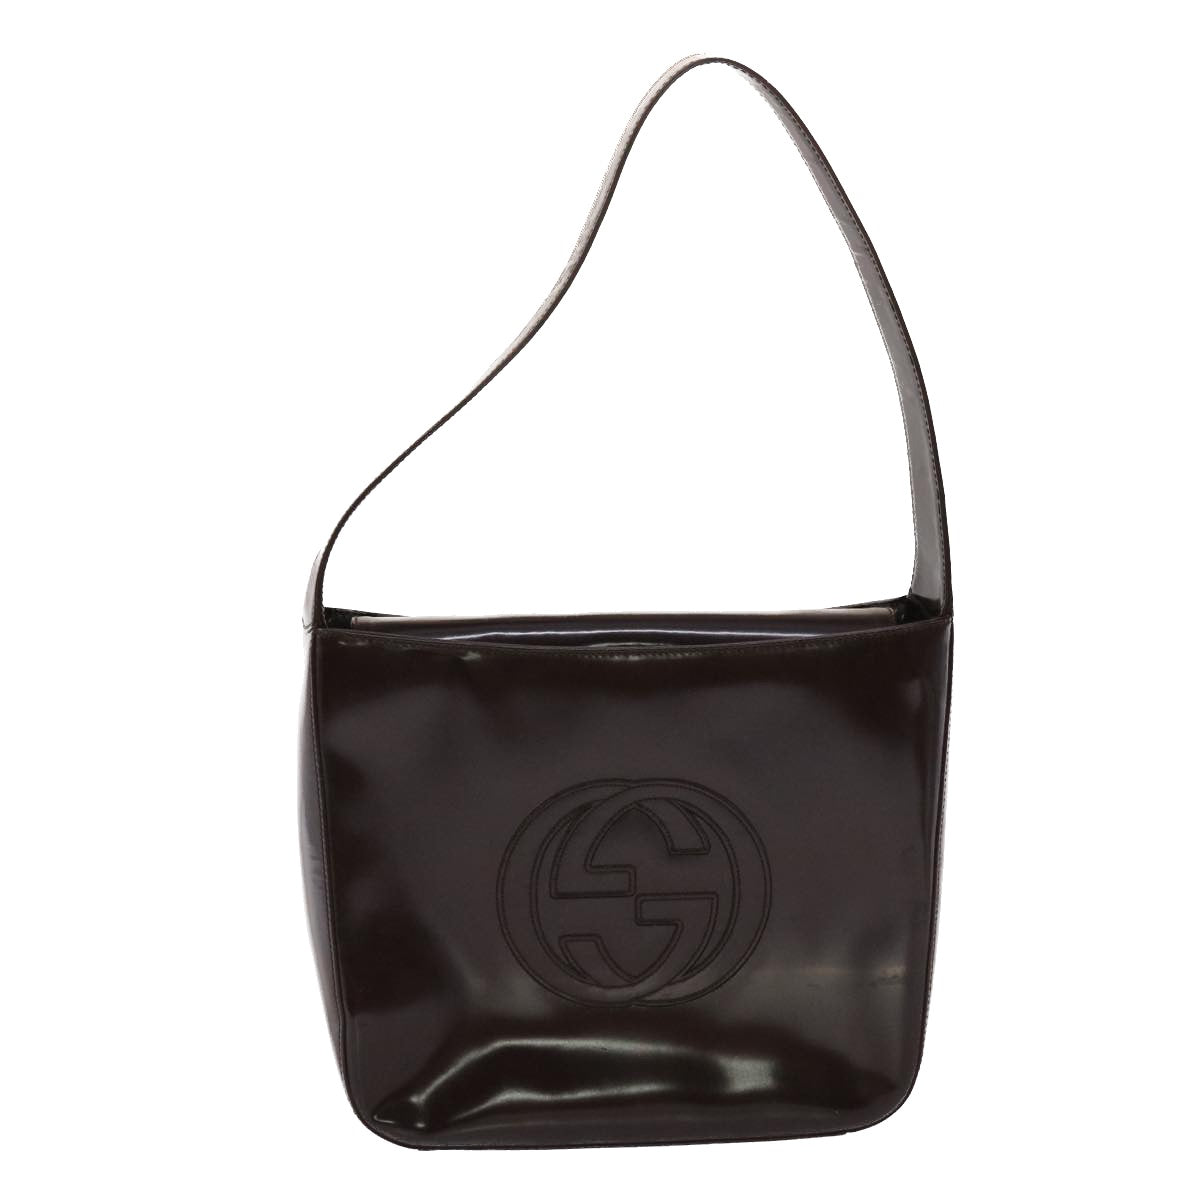 GUCCI Shoulder Bag Patent leather Brown 000.1046.0506 Auth yk8001B